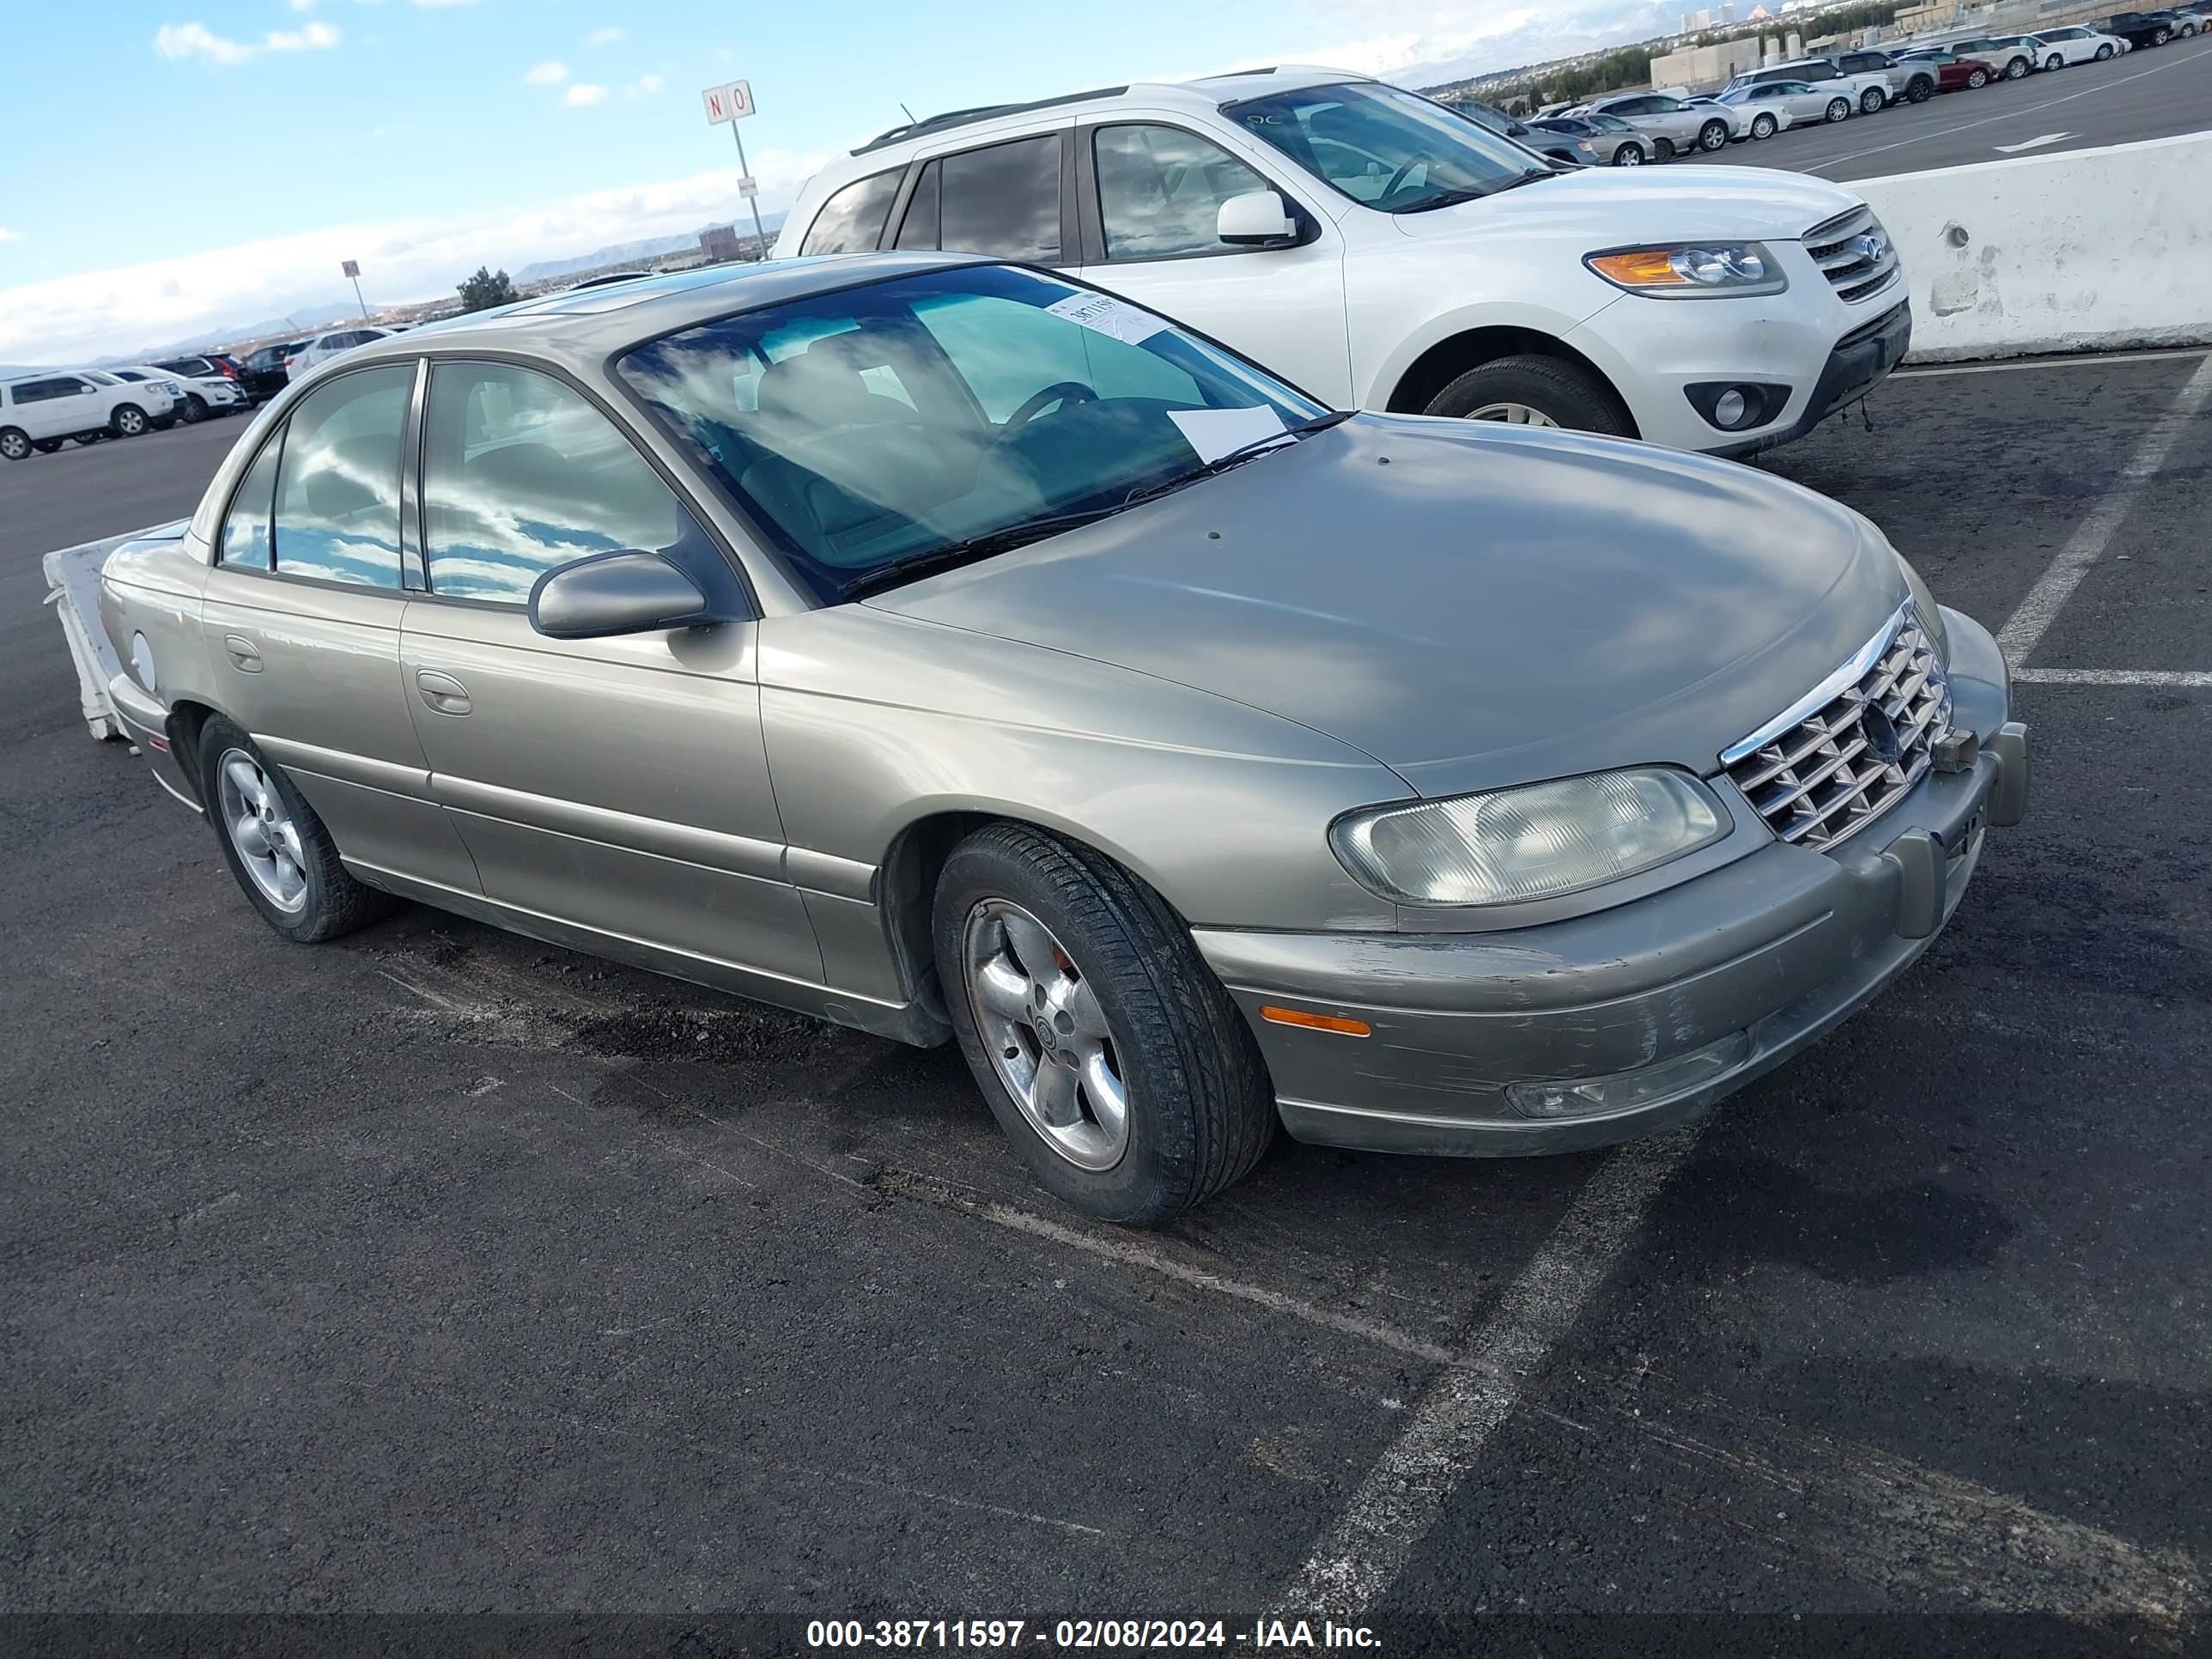 vin: W06VR52R4VR946868 W06VR52R4VR946868 1997 cadillac catera 3000 for Sale in 89122, 3225 South Hollywood Blvd, Las Vegas, Nevada, USA